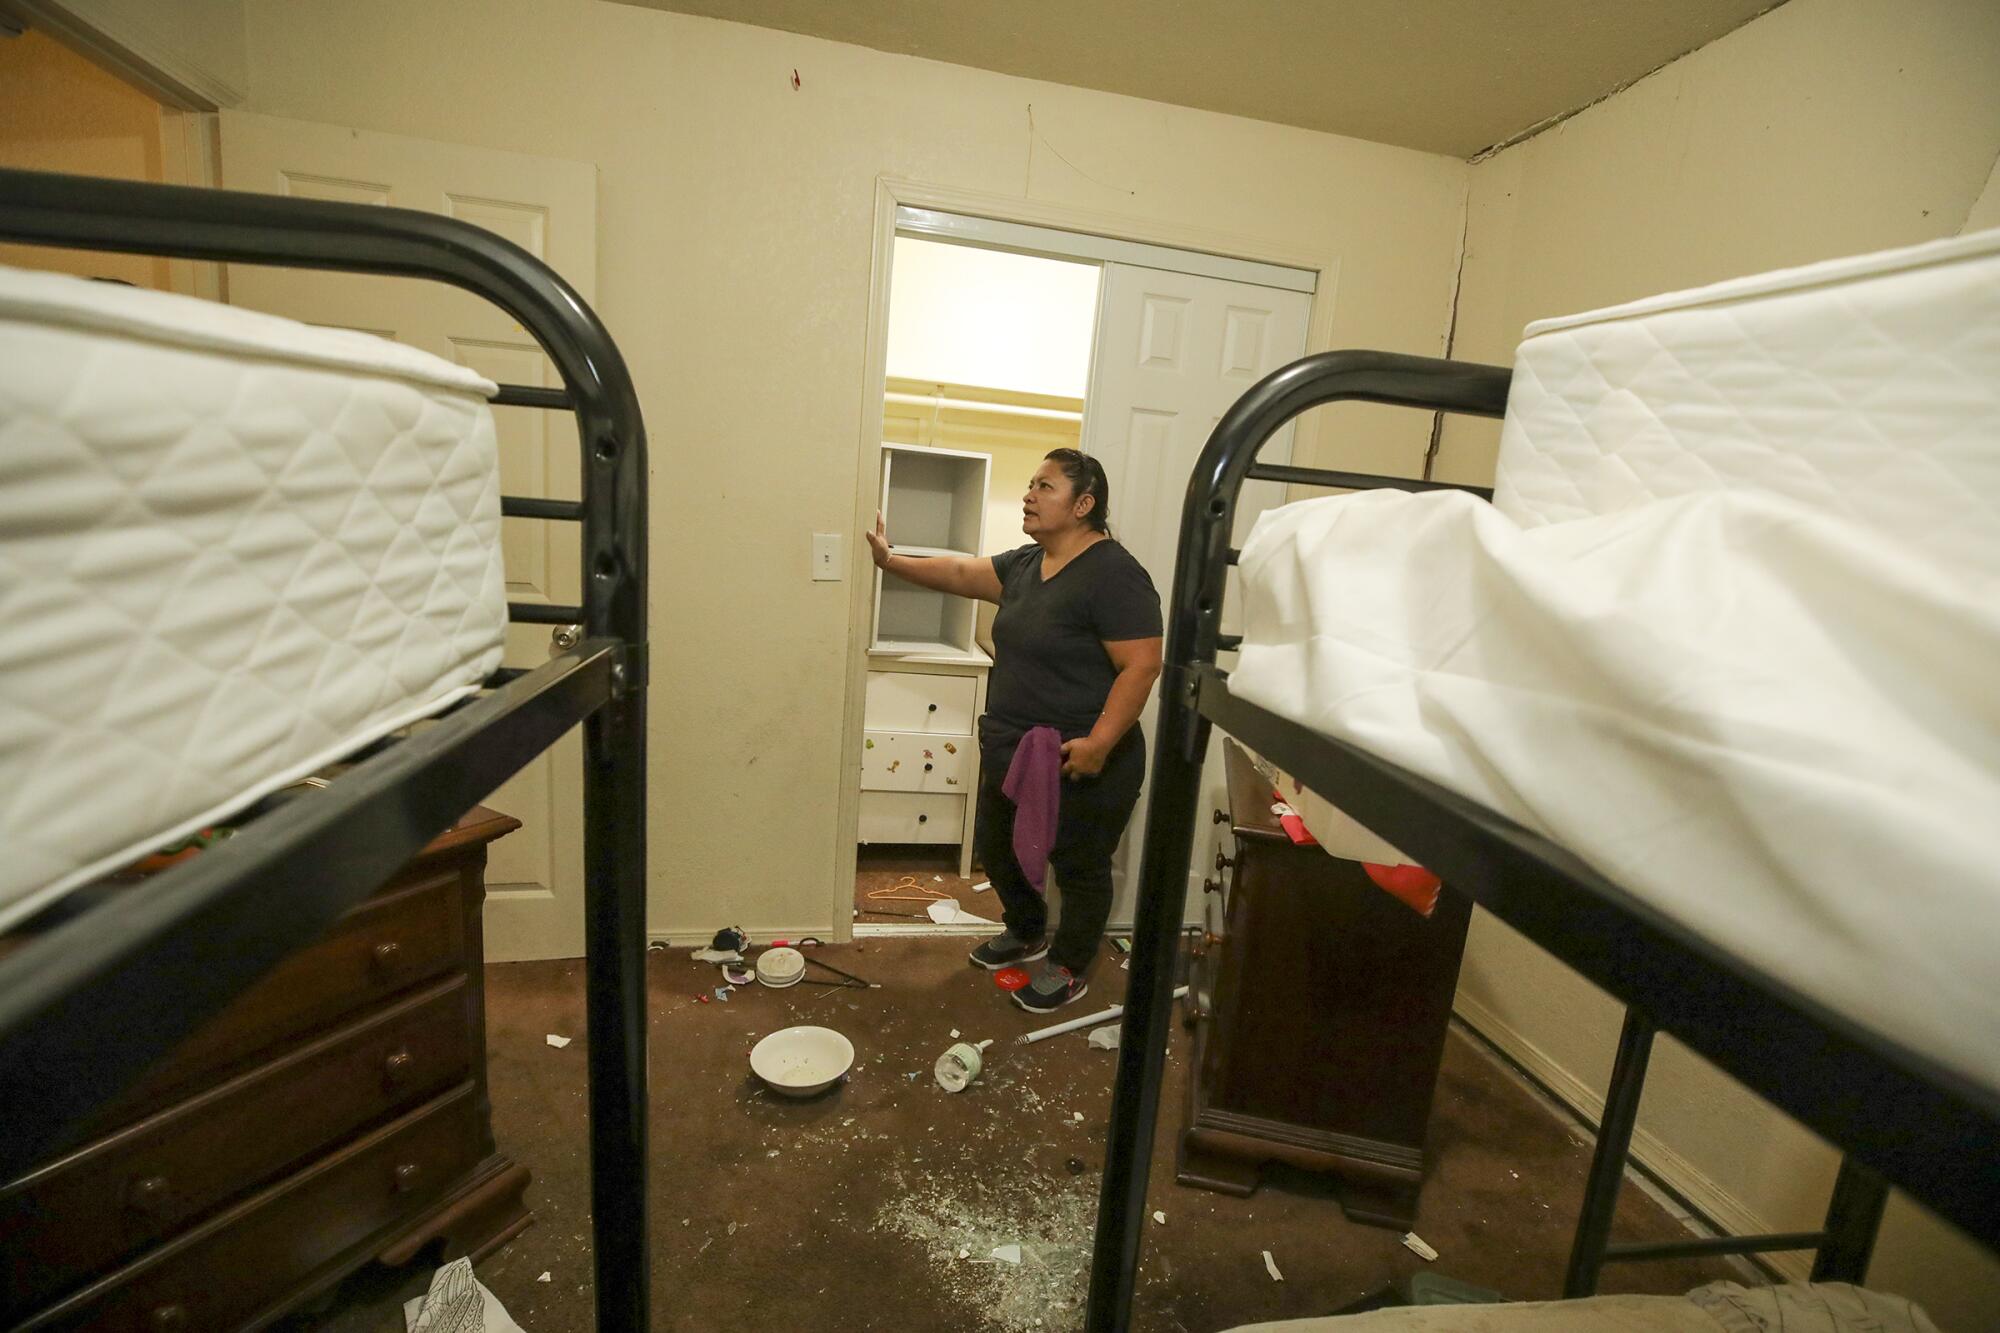 Juana Oceguera takes stock of her apartment that became inhabitable in an explosion caused by LAPD